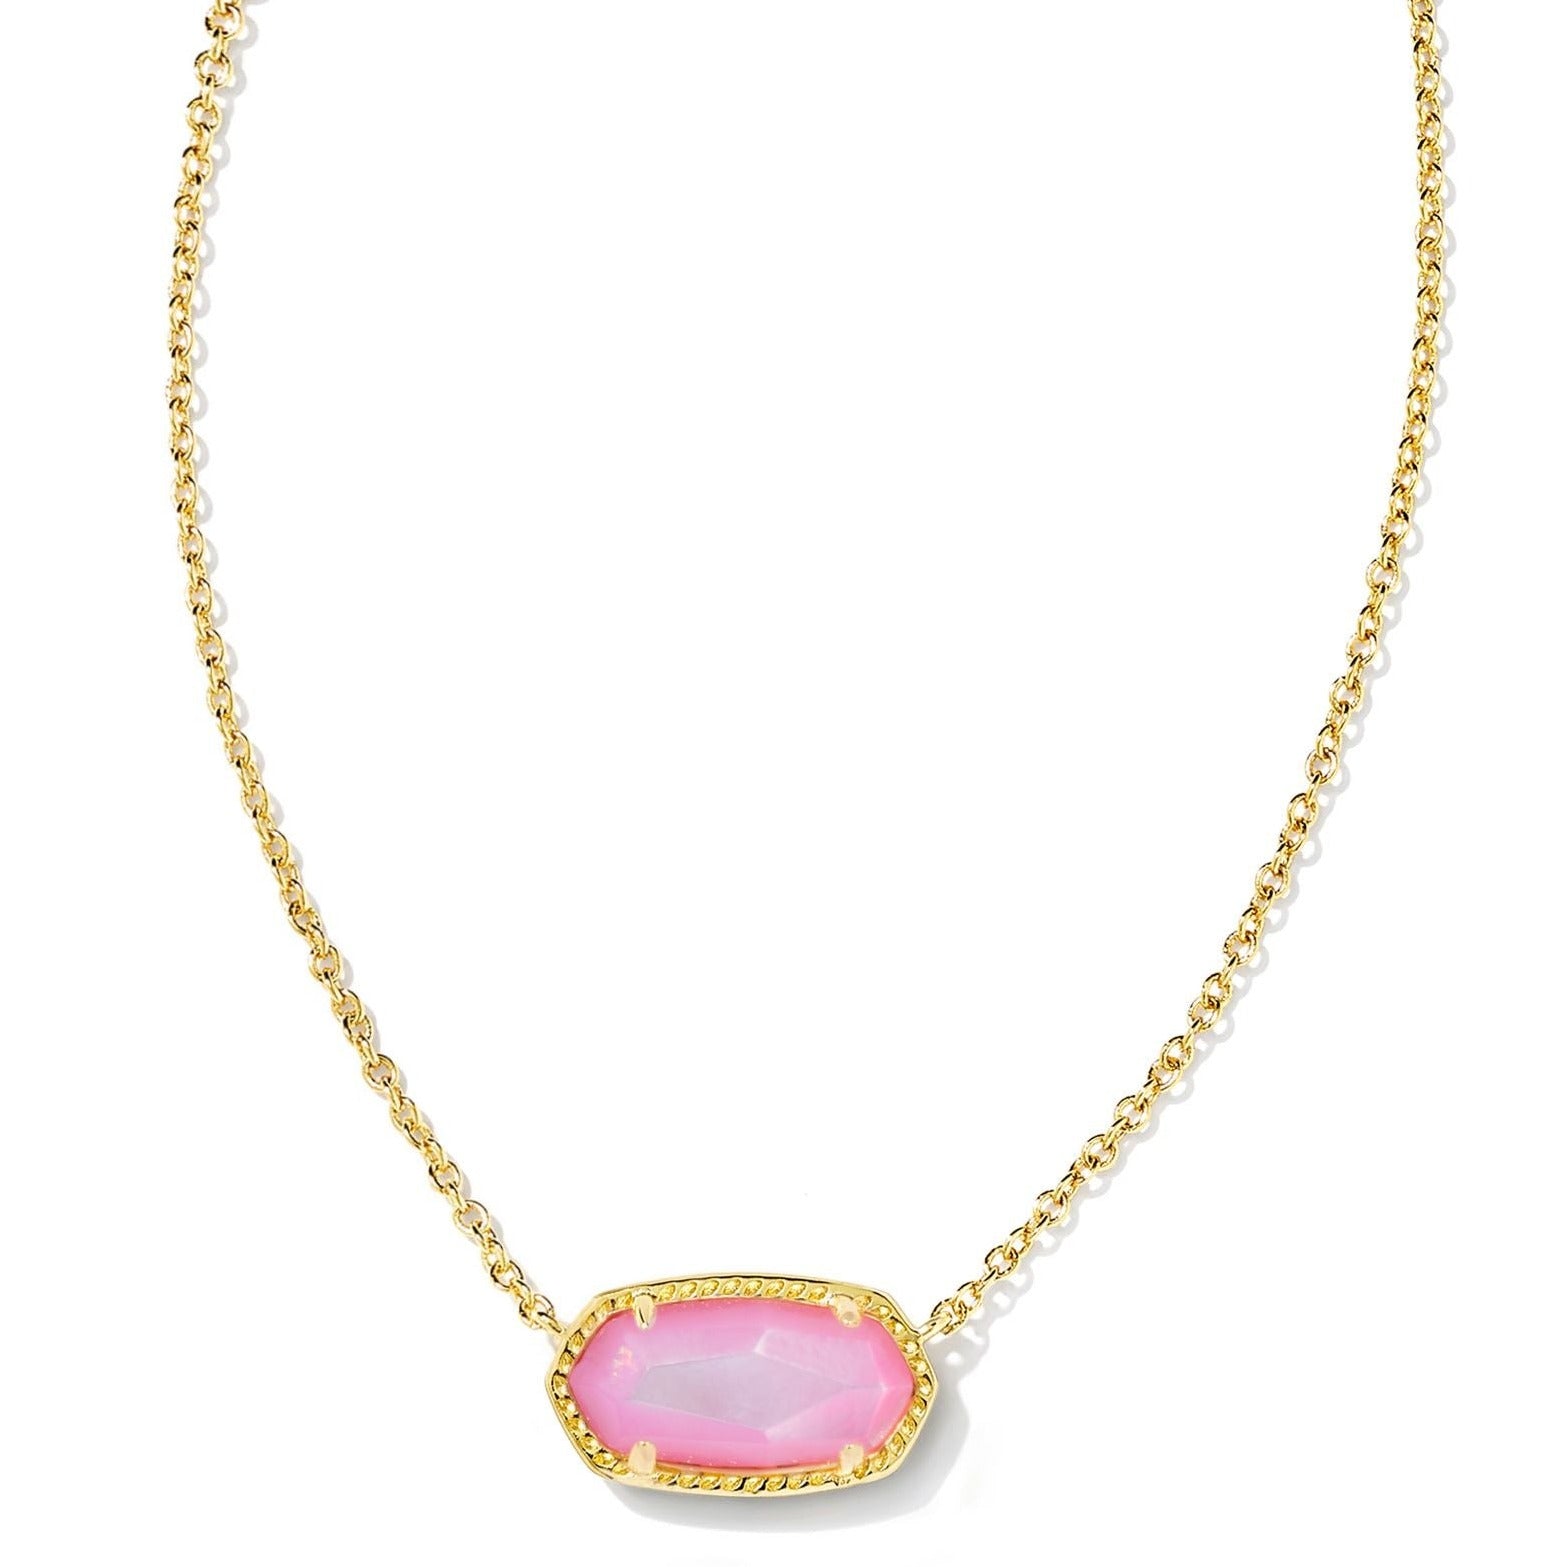 Kendra Scott | Elisa Gold Short Pendant Necklace in Blush Ivory Mother of Pearl - Giddy Up Glamour Boutique